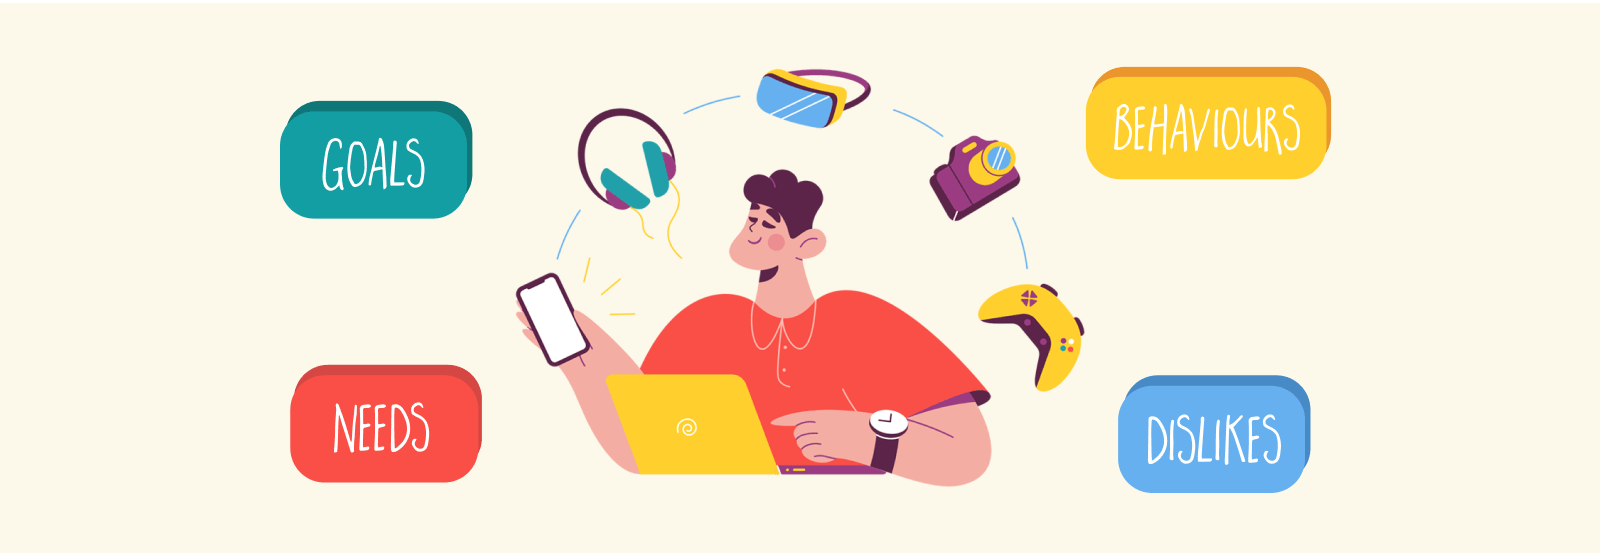 Illustration of a person with various gadgets